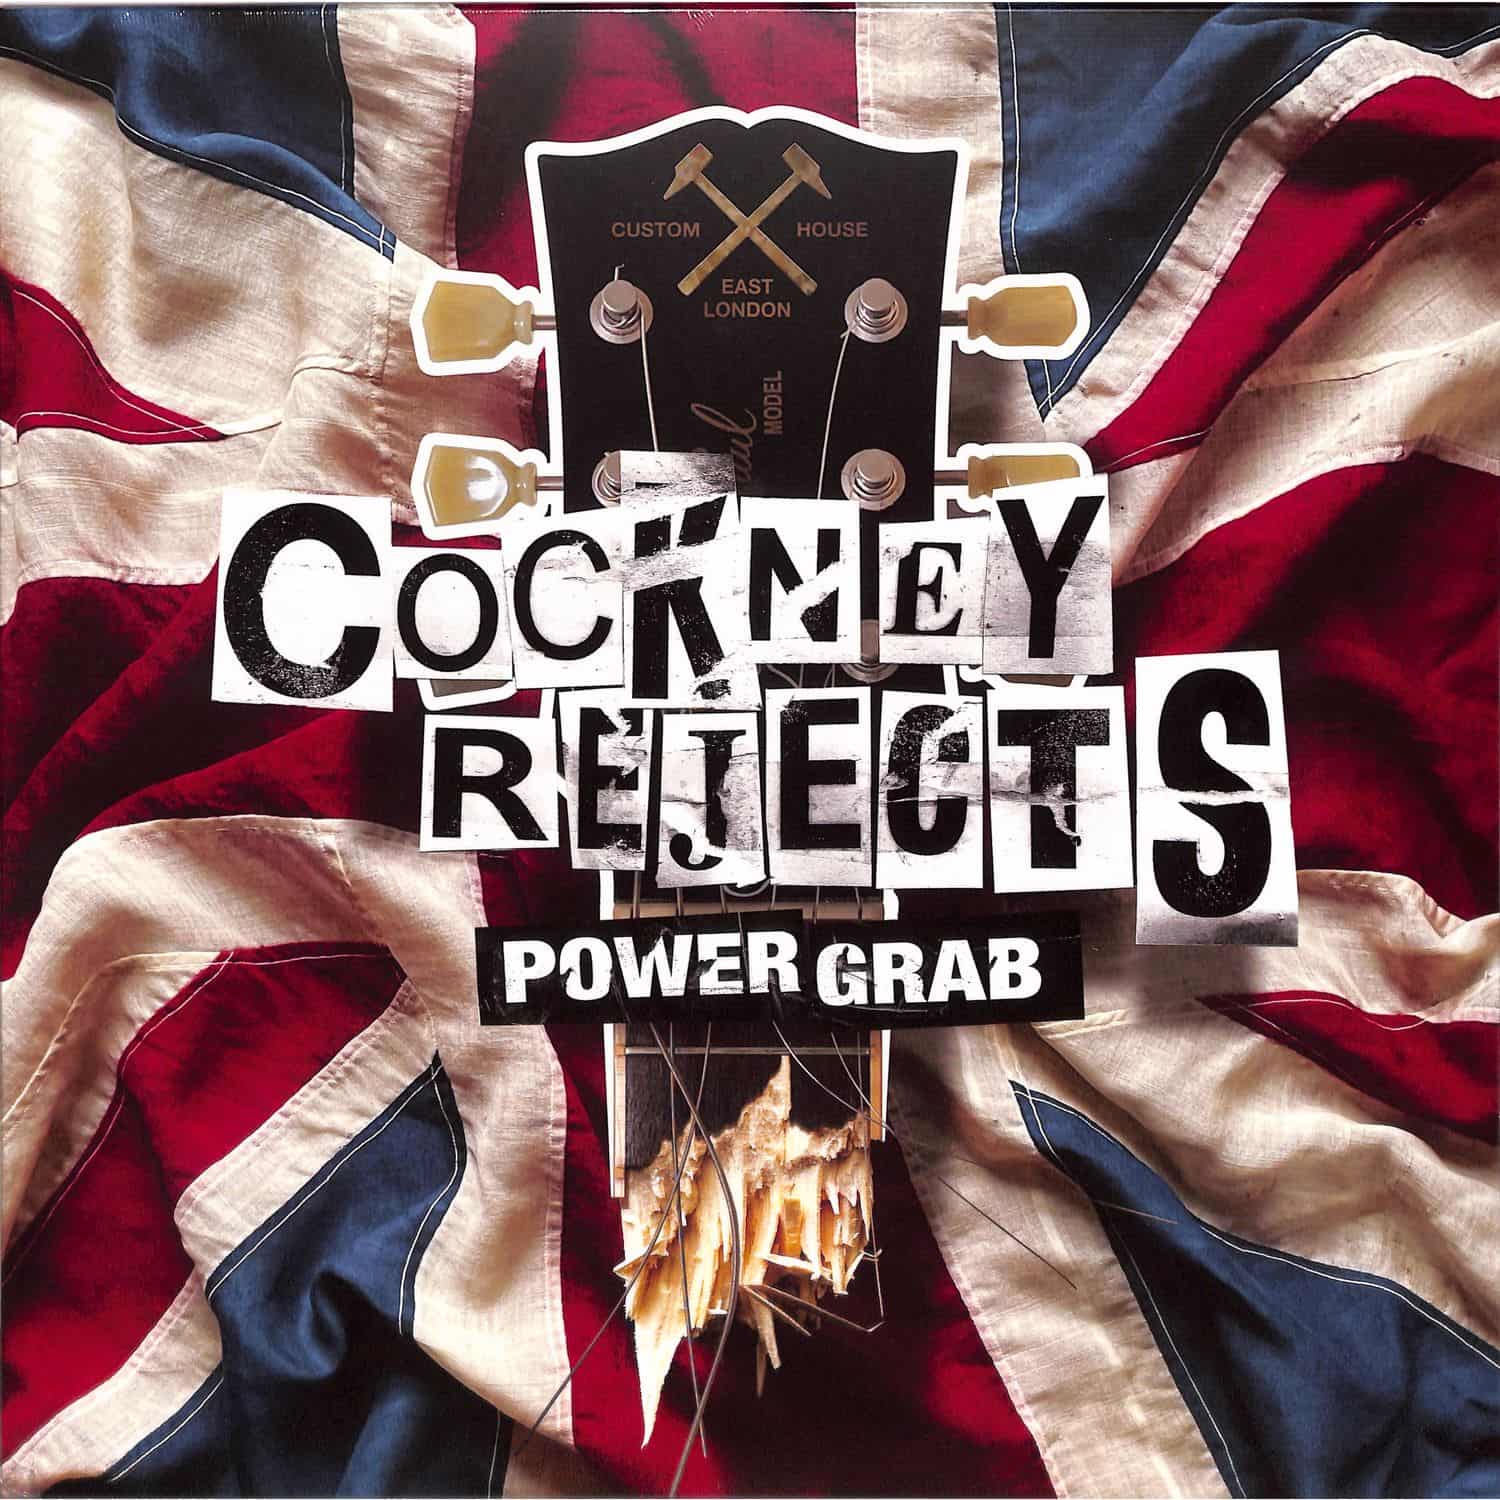 Cockney Rejects - POWER GRAB 